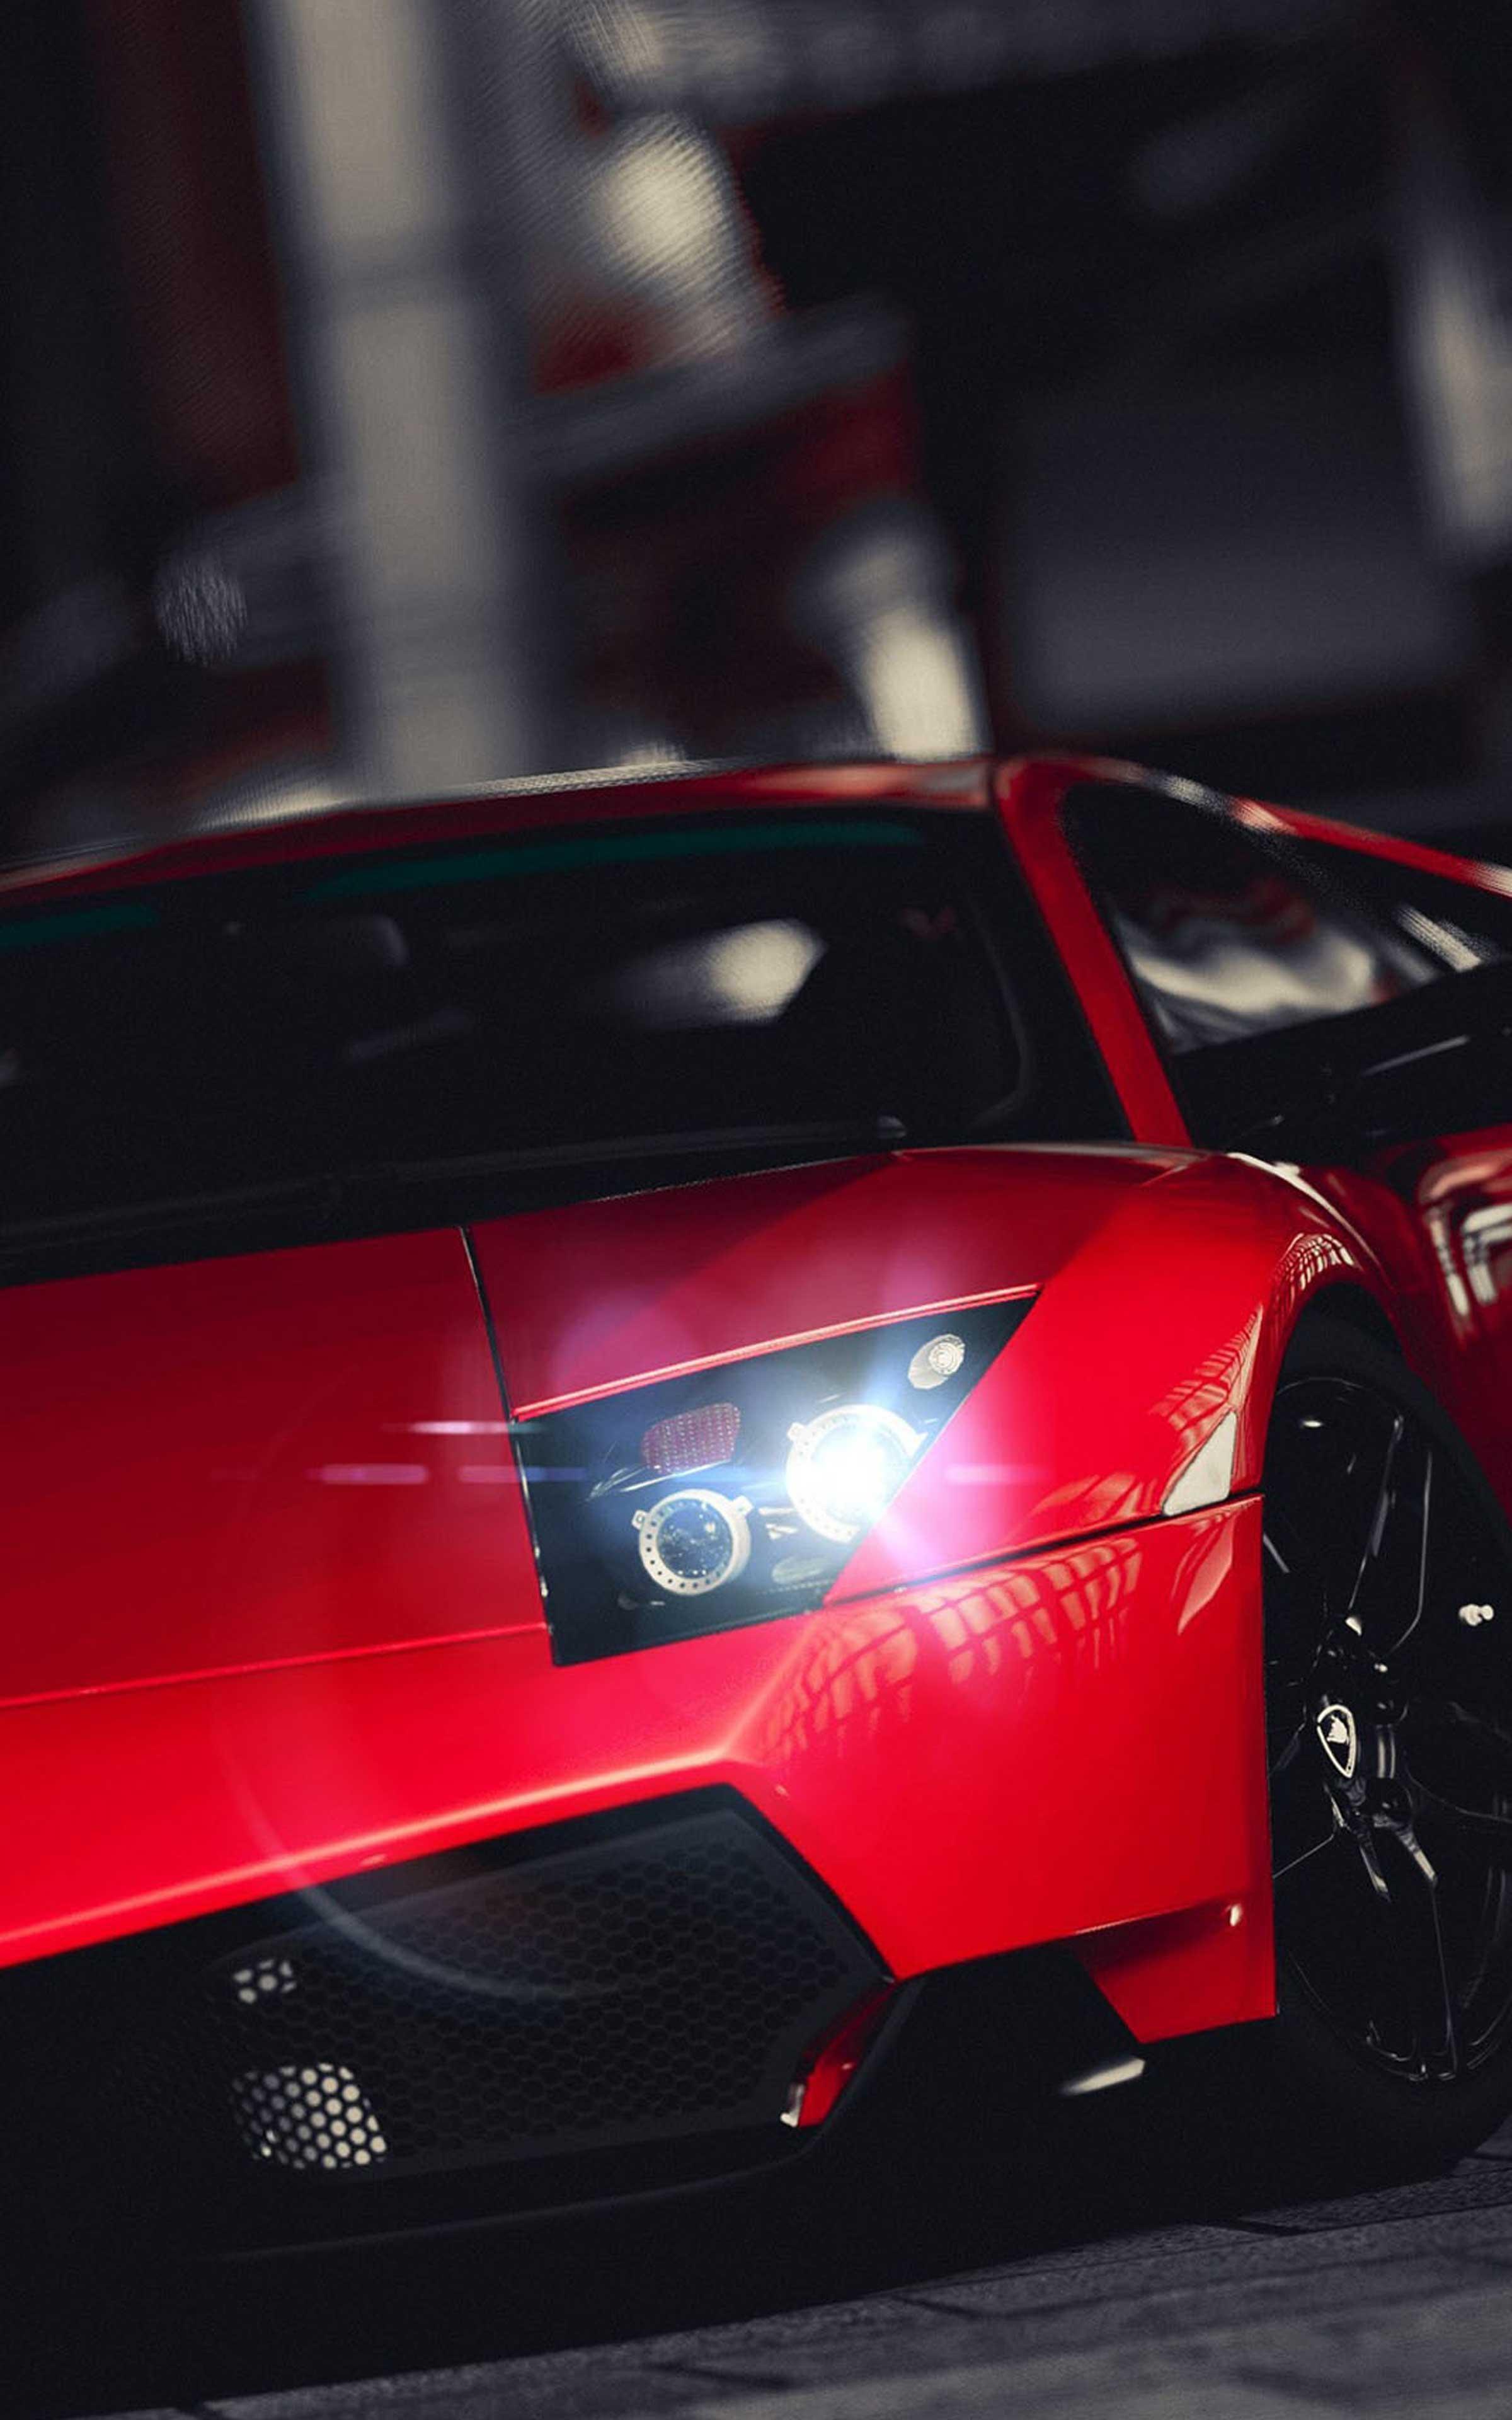 Lamborghini Wallpaper Lamborghini Wallpaper Mobile For Android